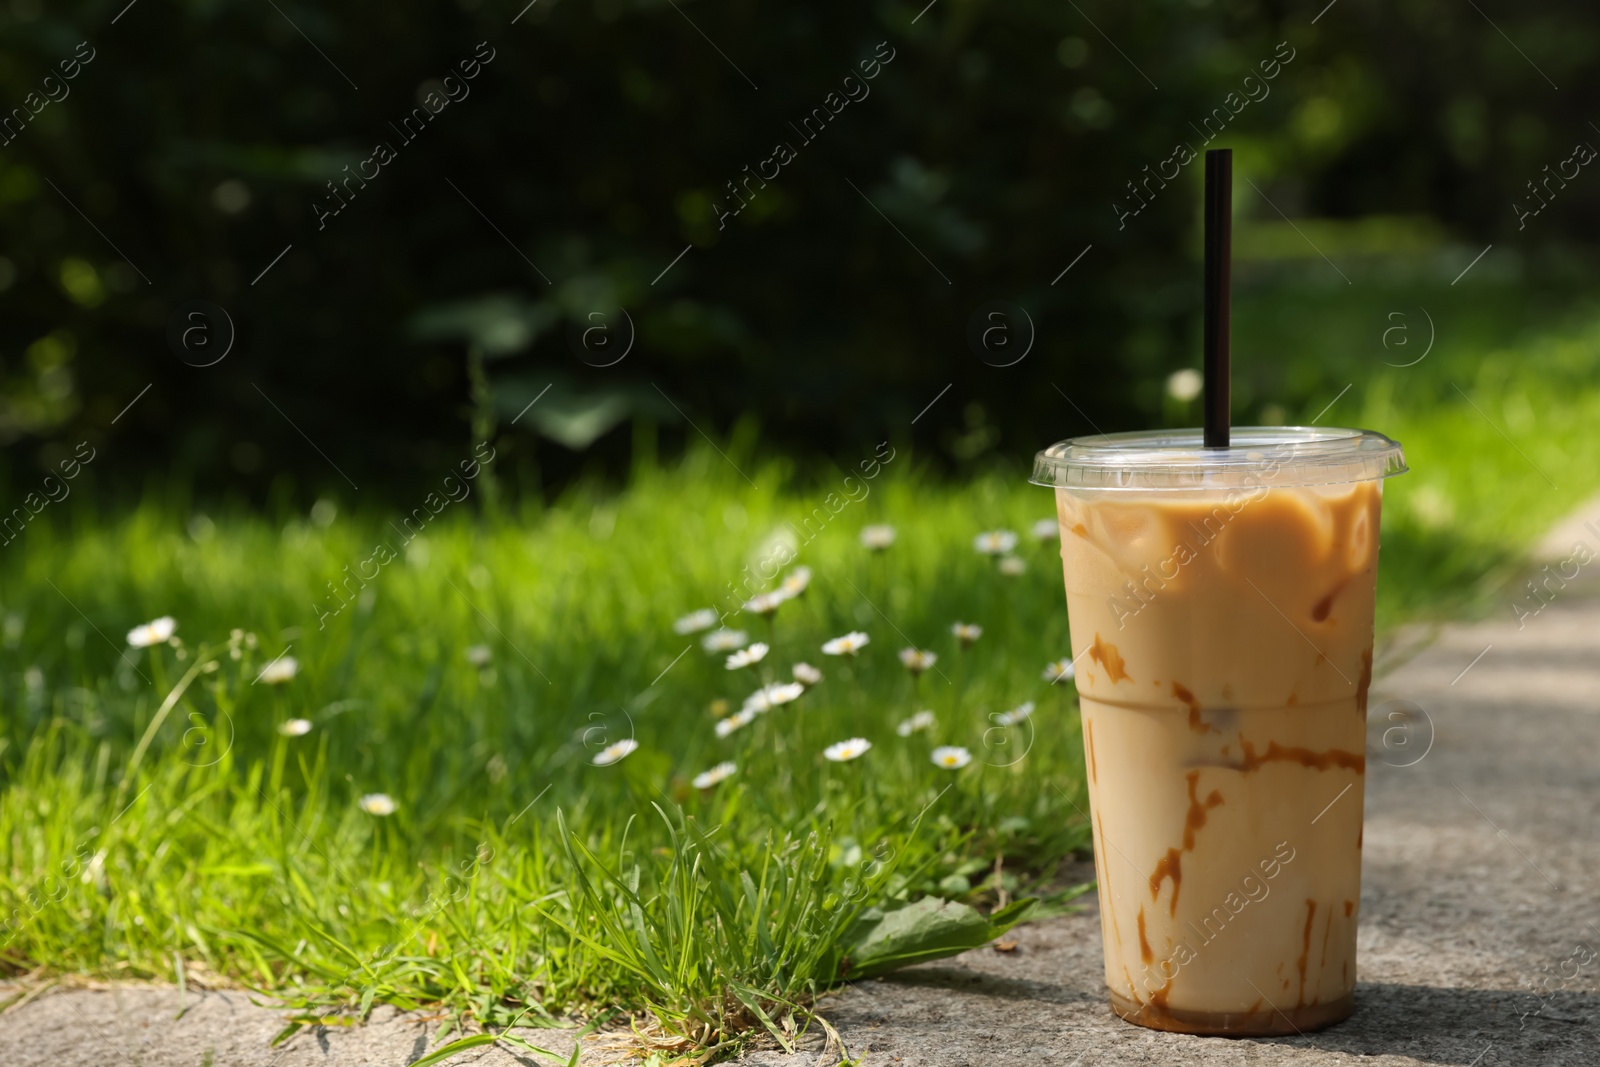 Photo of Takeaway plastic cup with cold coffee drink and straw near green grass outdoors, space for text